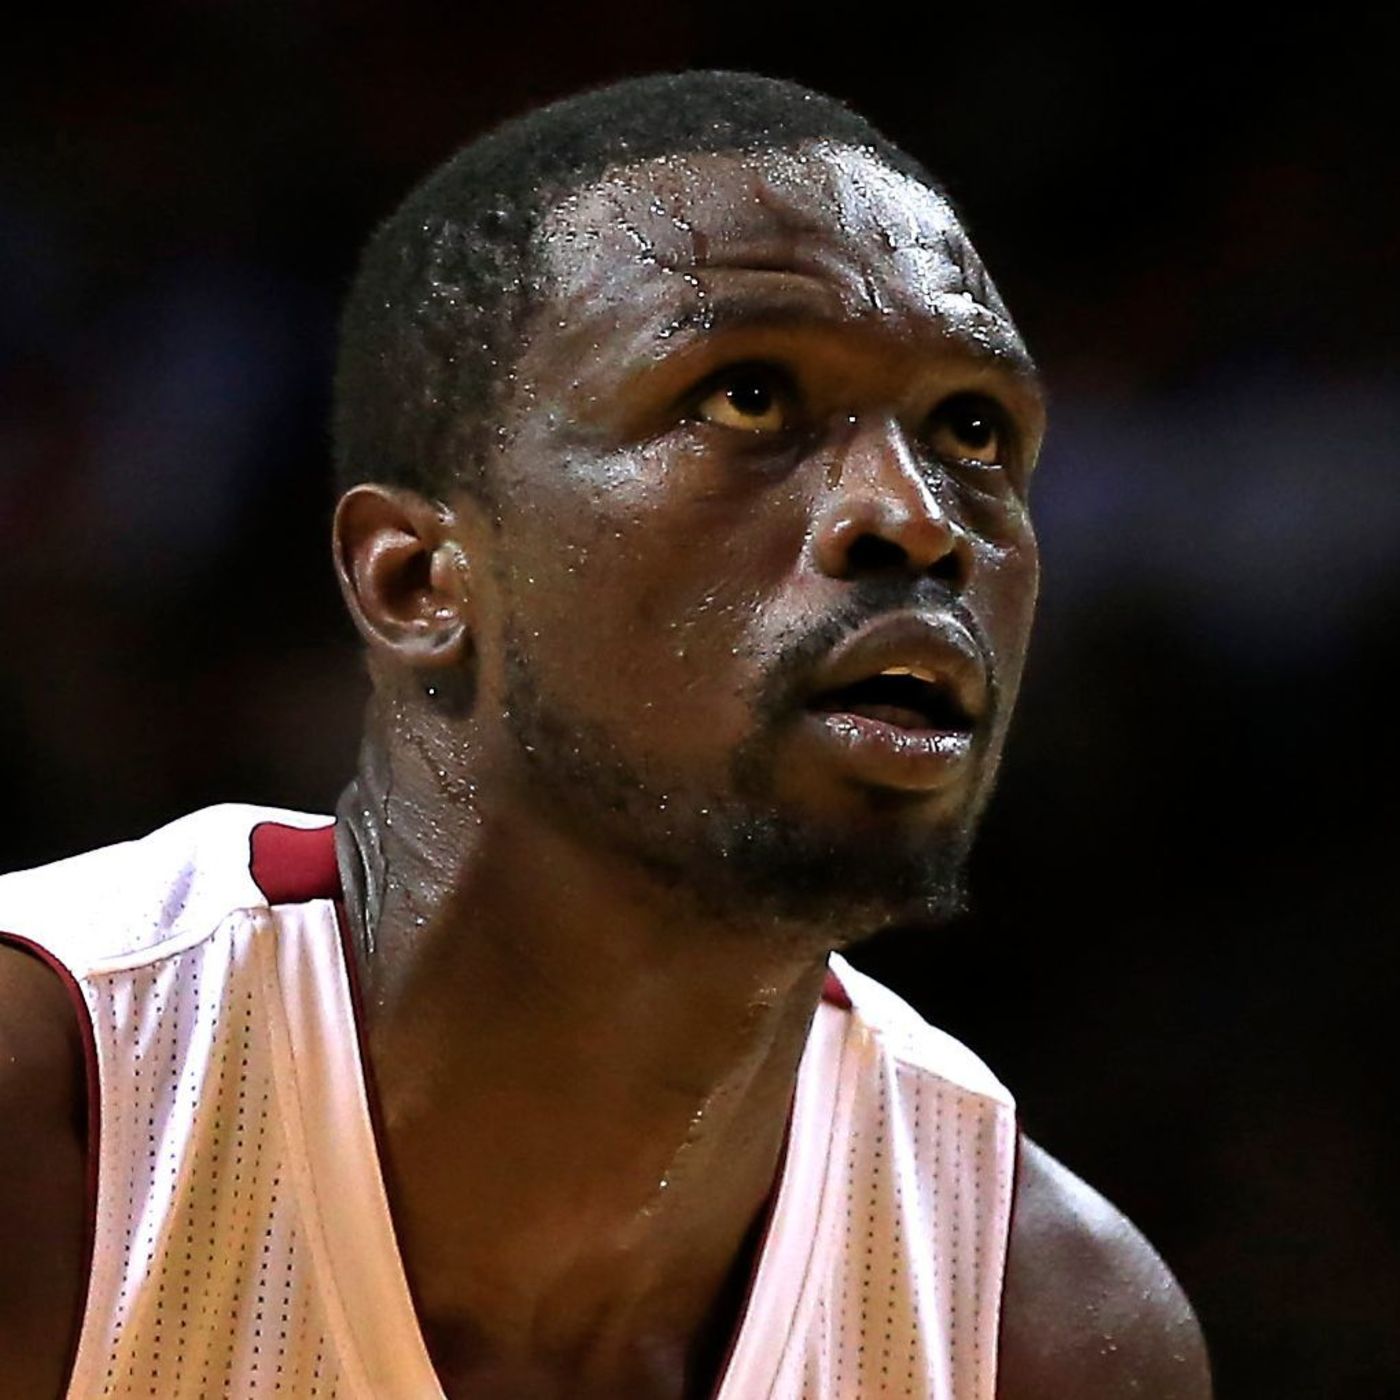 Luol Deng on the Heat's chances to knock off Cleveland and free agency